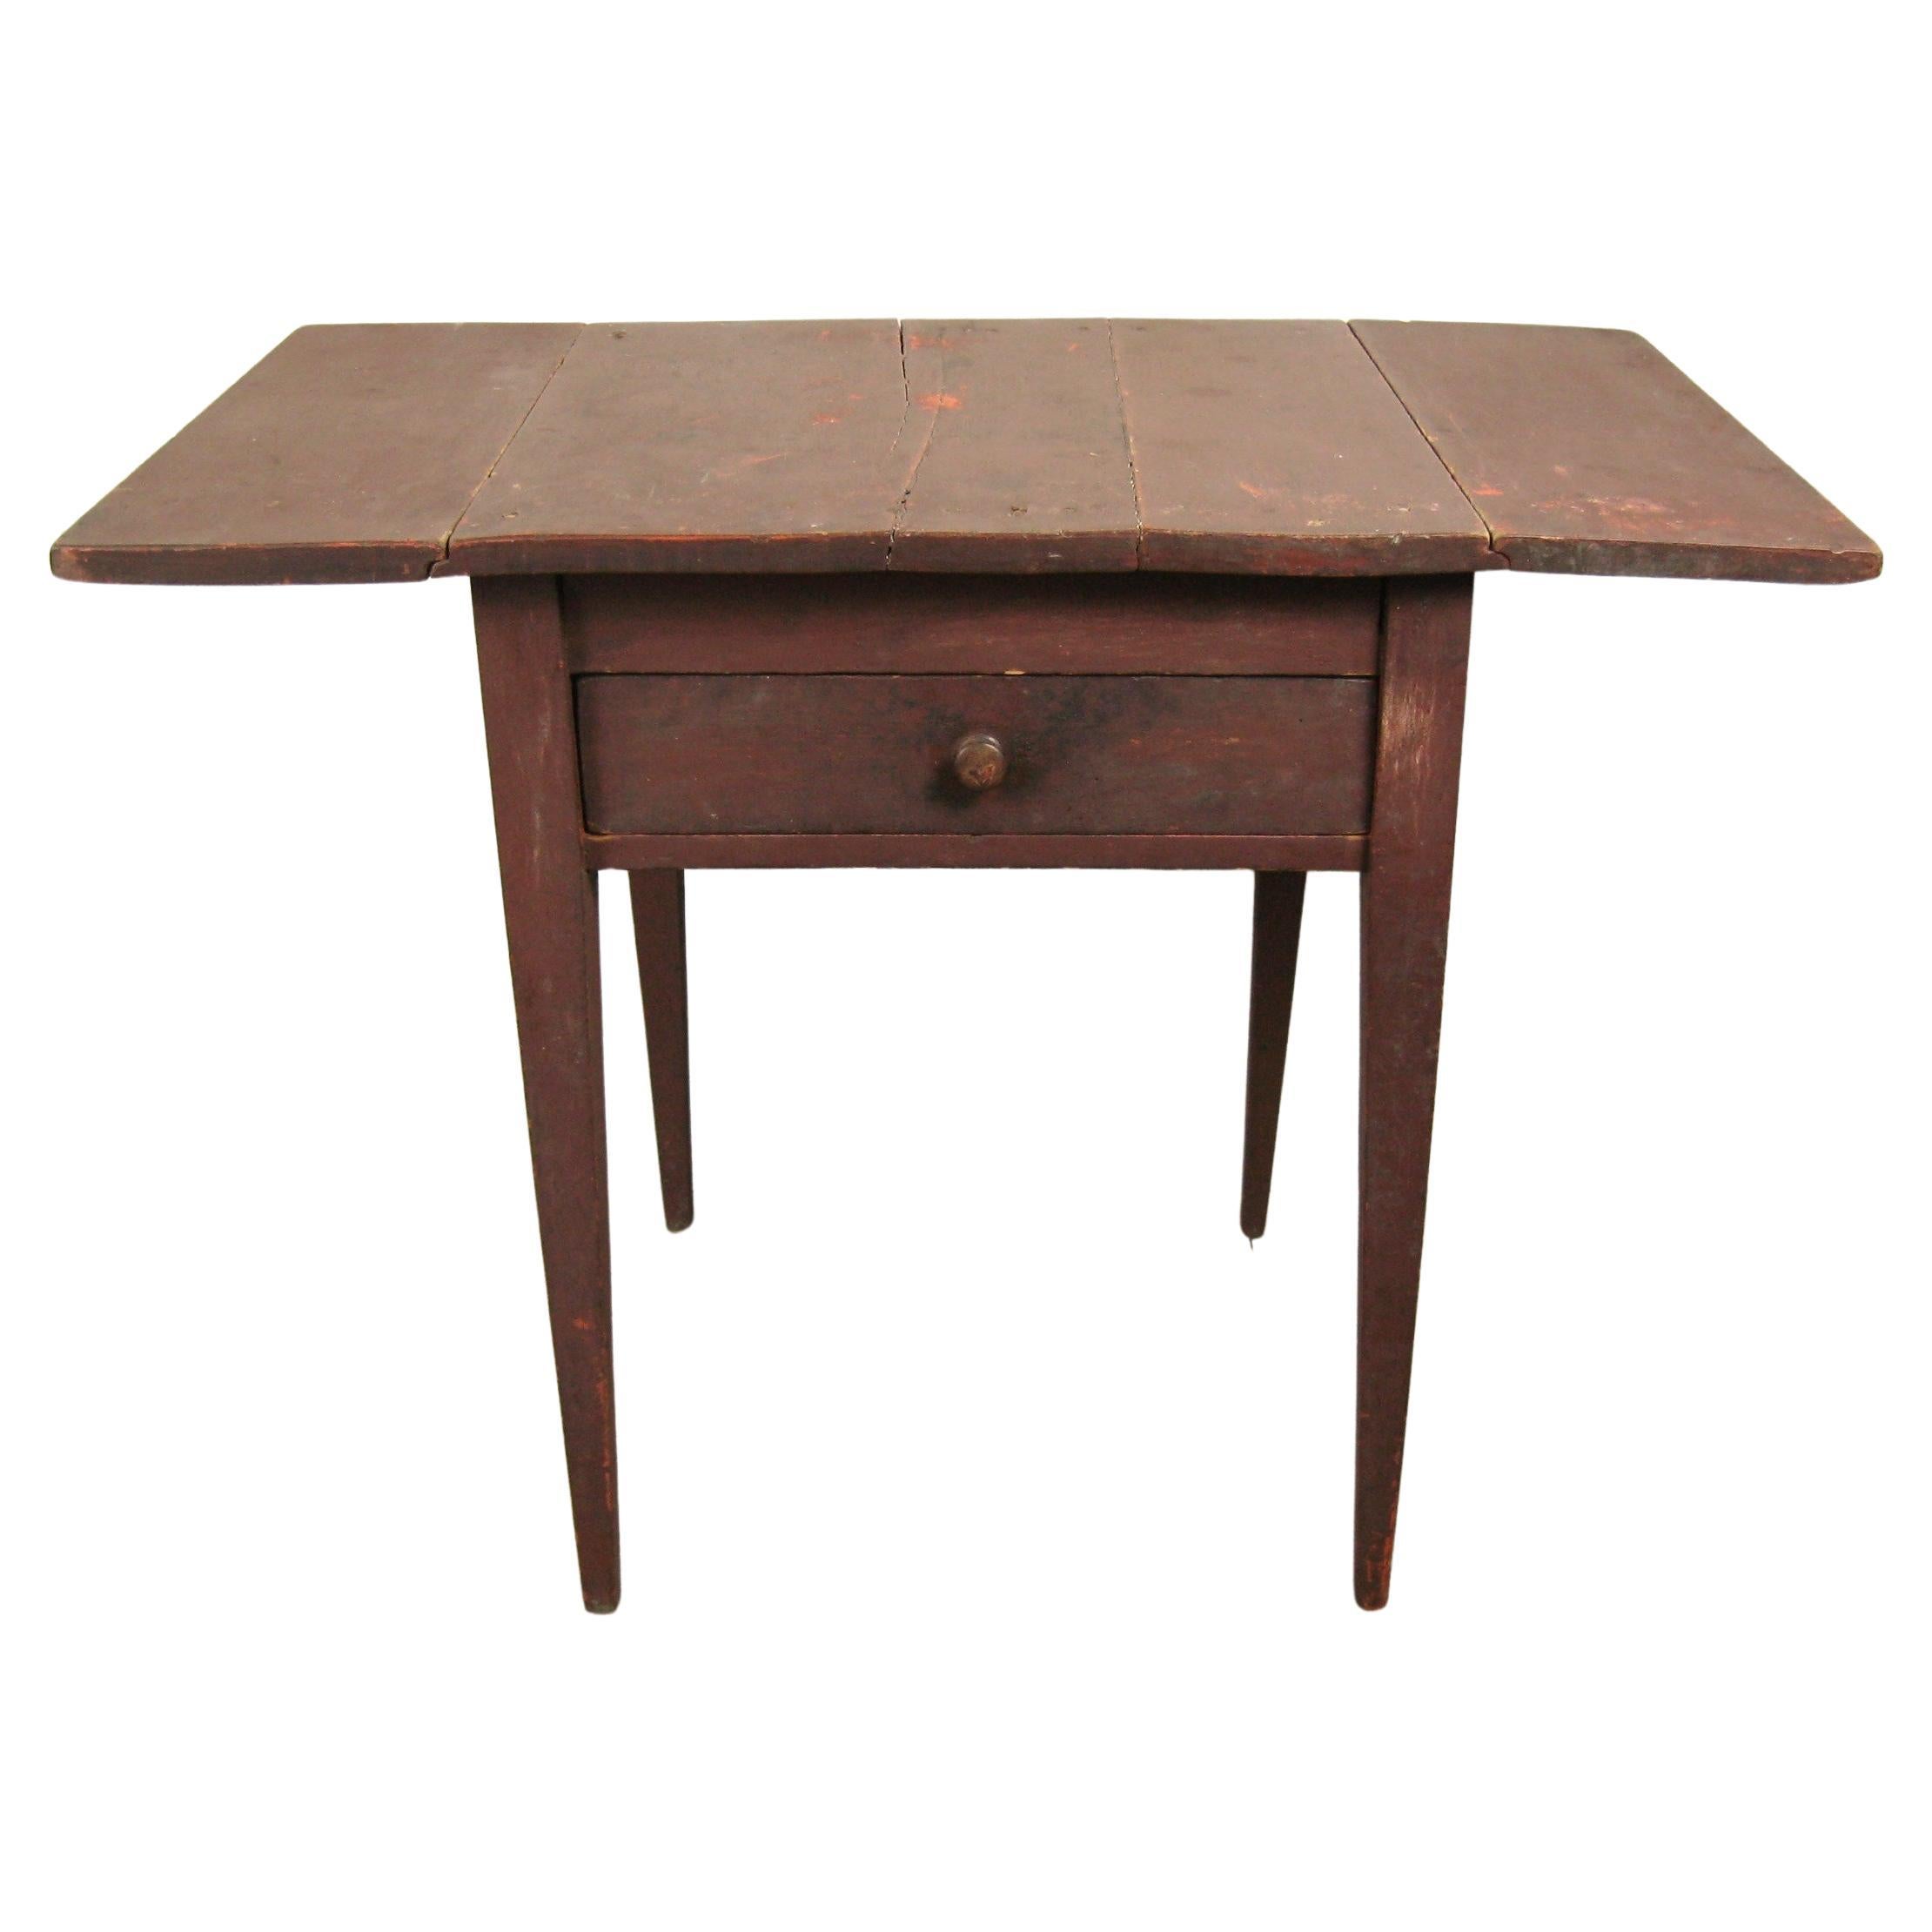 19th Century Primitive Farm workDrop leaf table with Tapered Leg